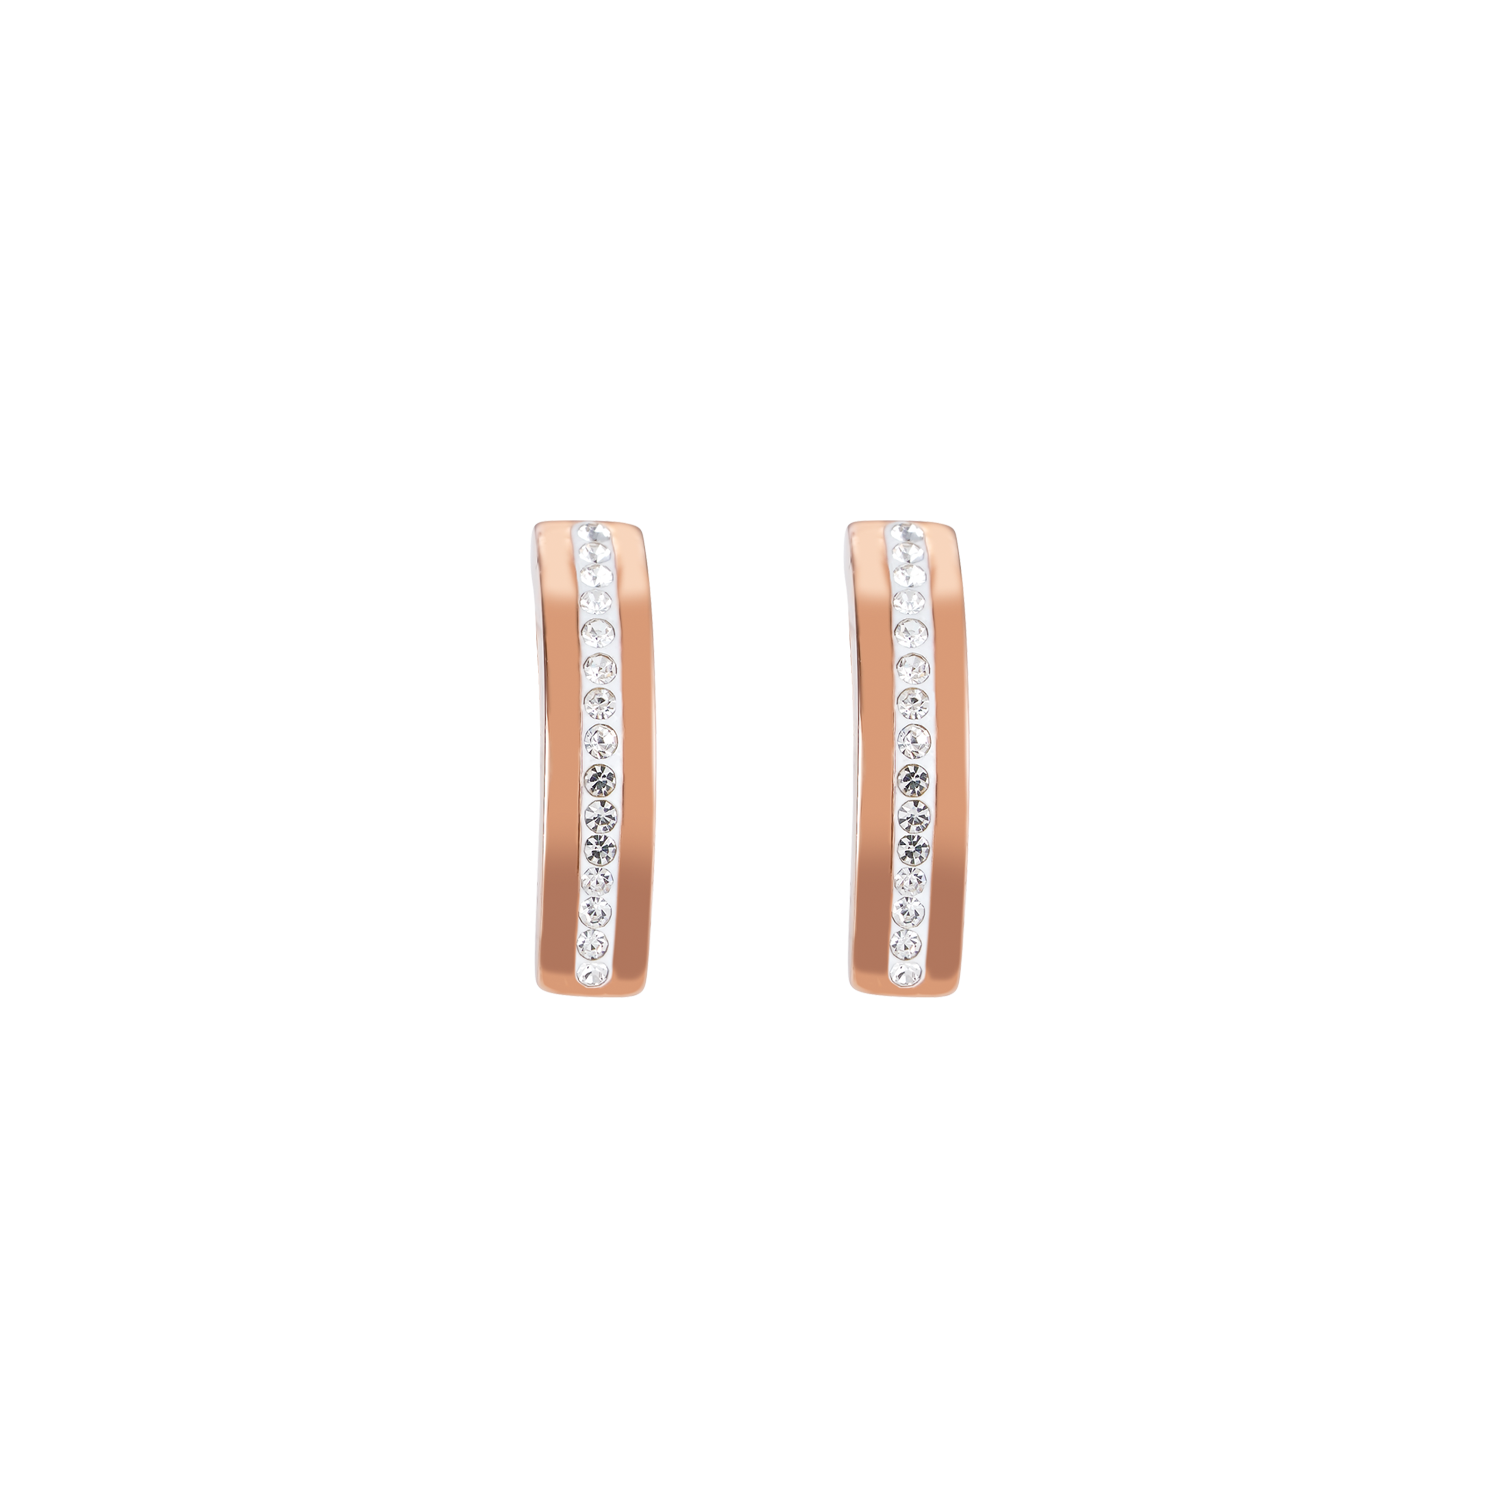 Earrings stainless steel rose gold & crystals pavé strip crystal